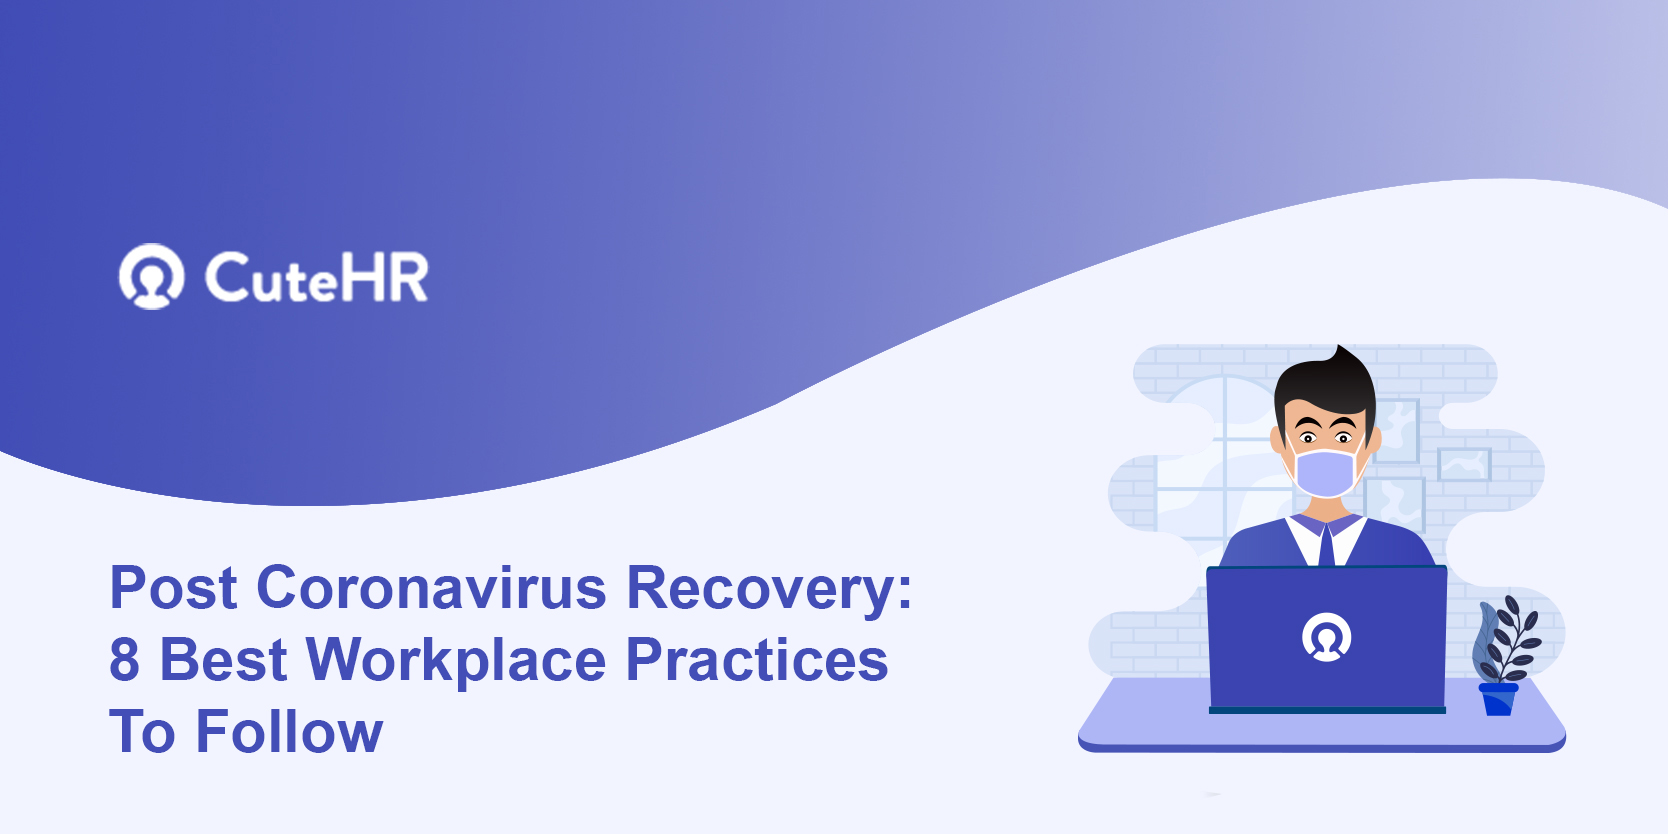 Post Coronavirus Recovery: 8 Best Workplace Practices To Follow.